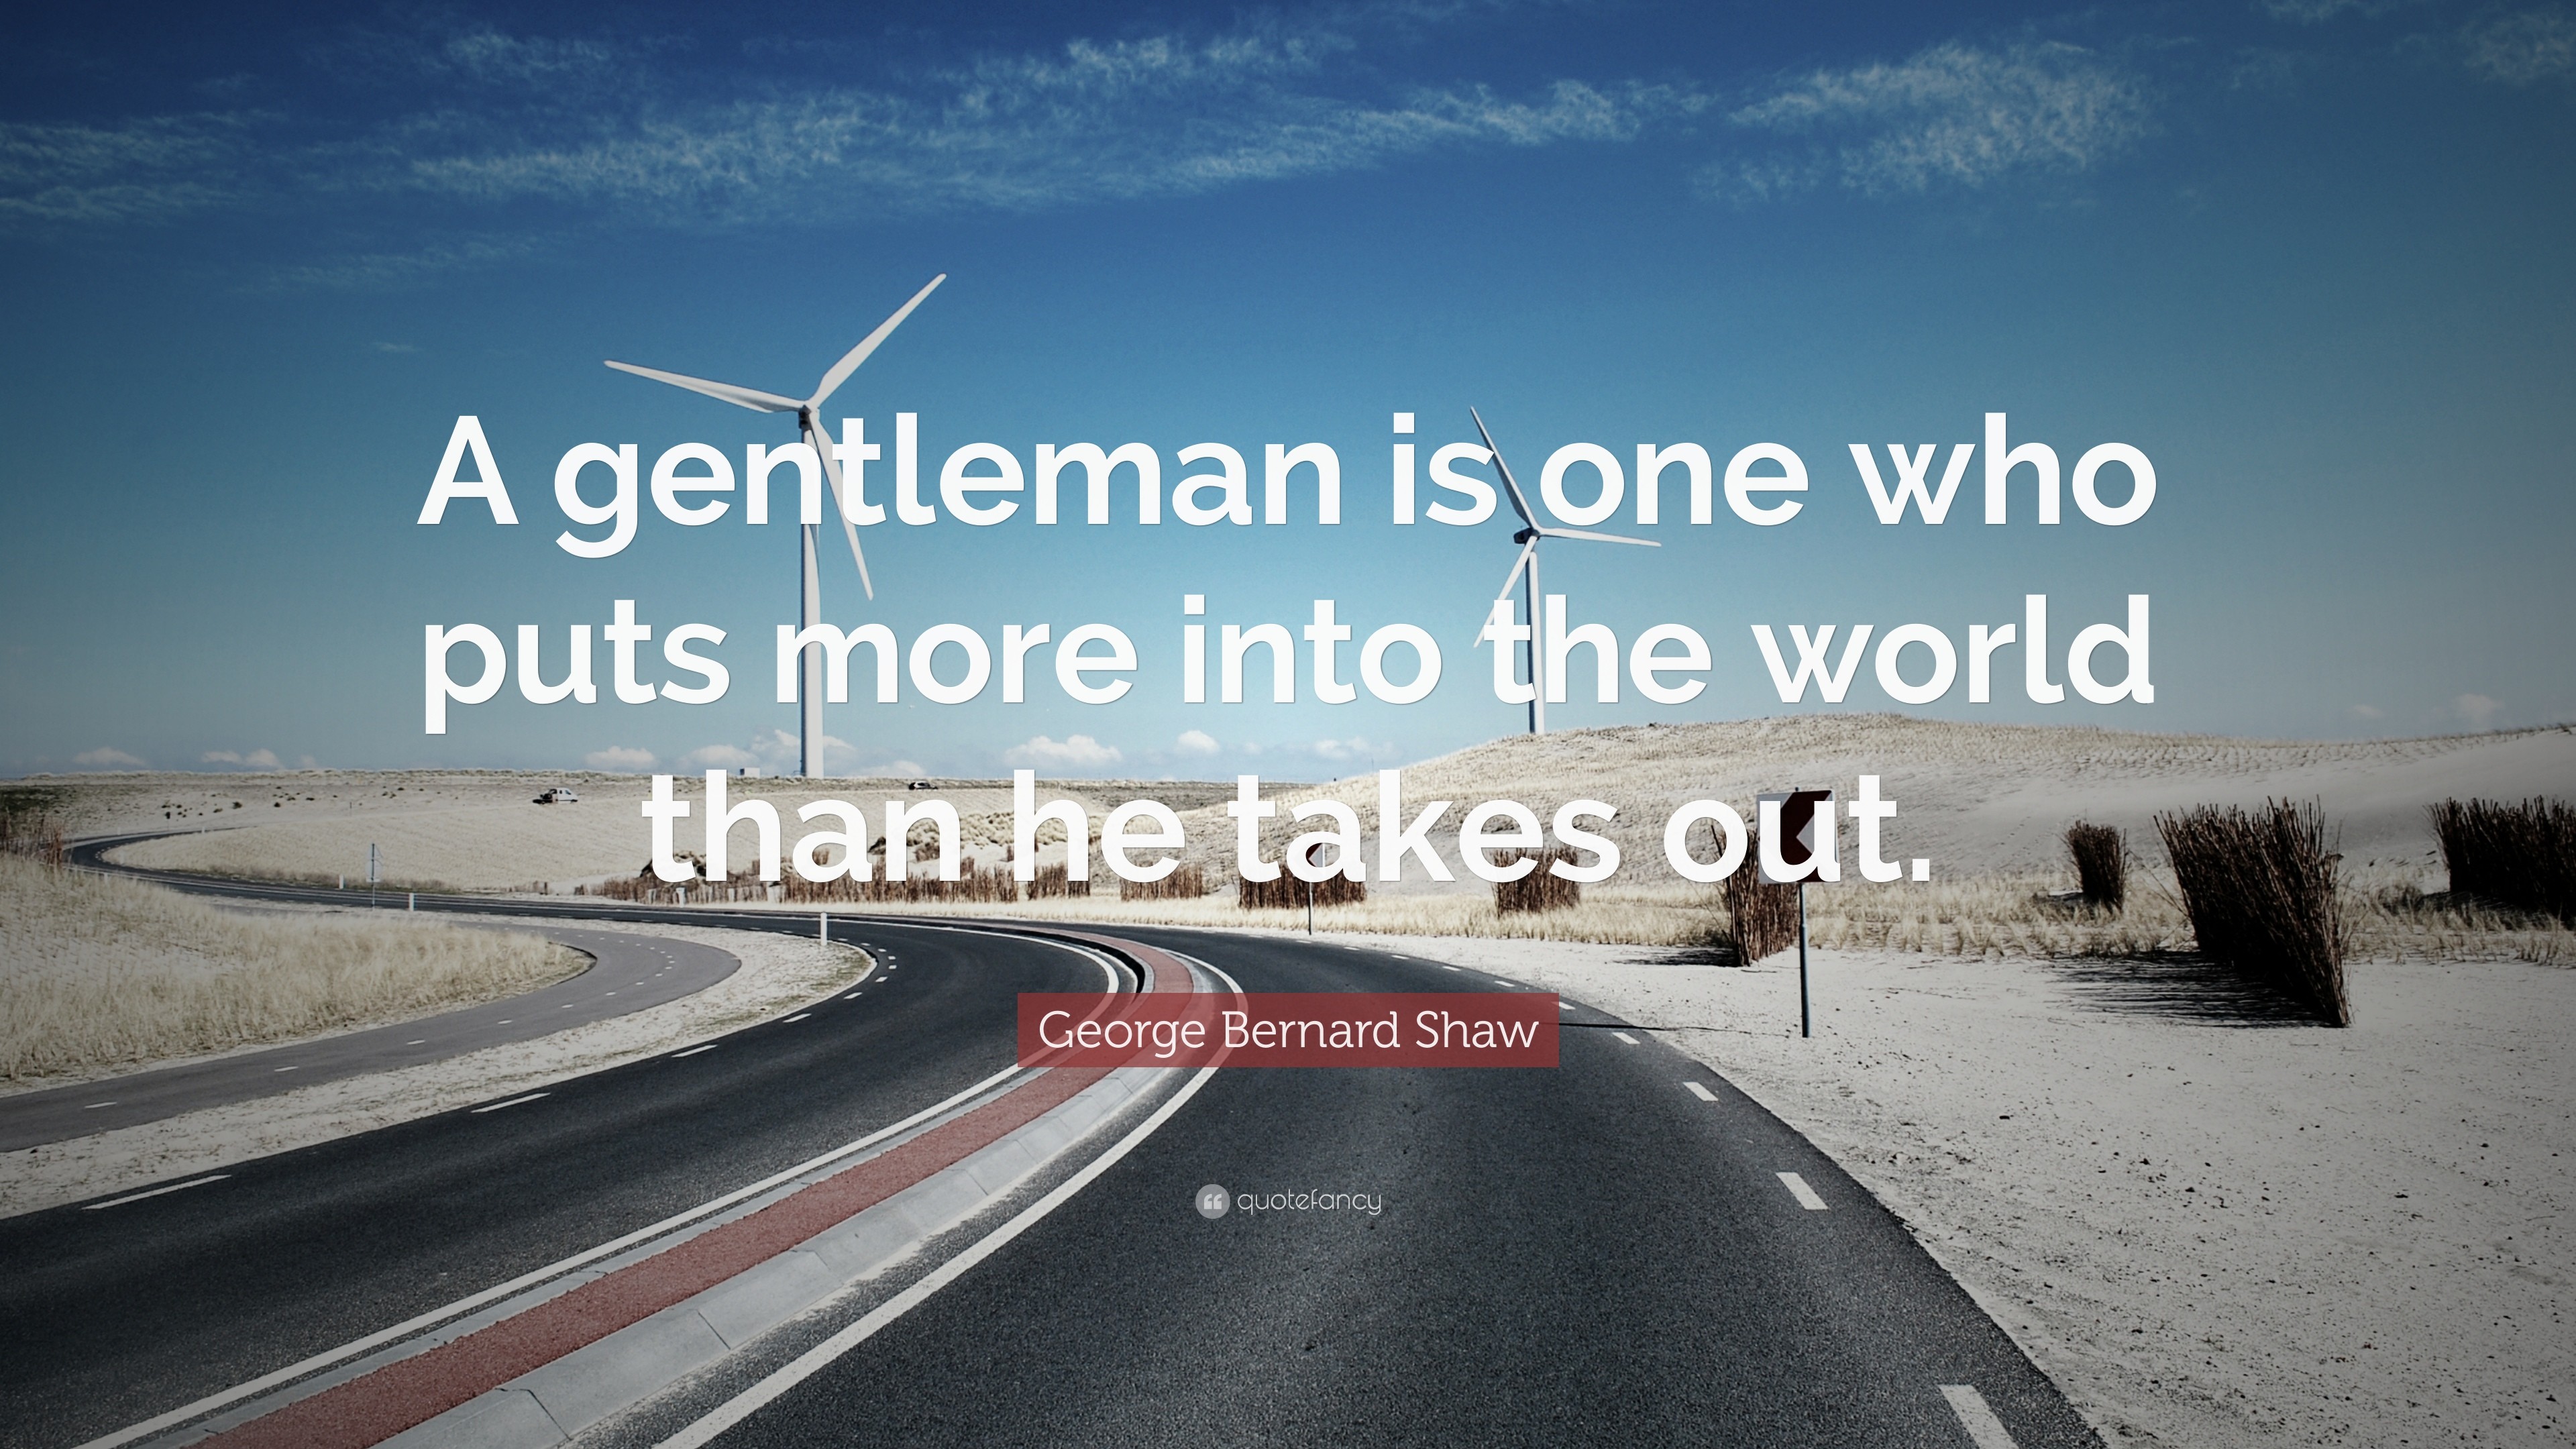 3840x2160 George Bernard Shaw Quote: “A gentleman is one who puts more into the world